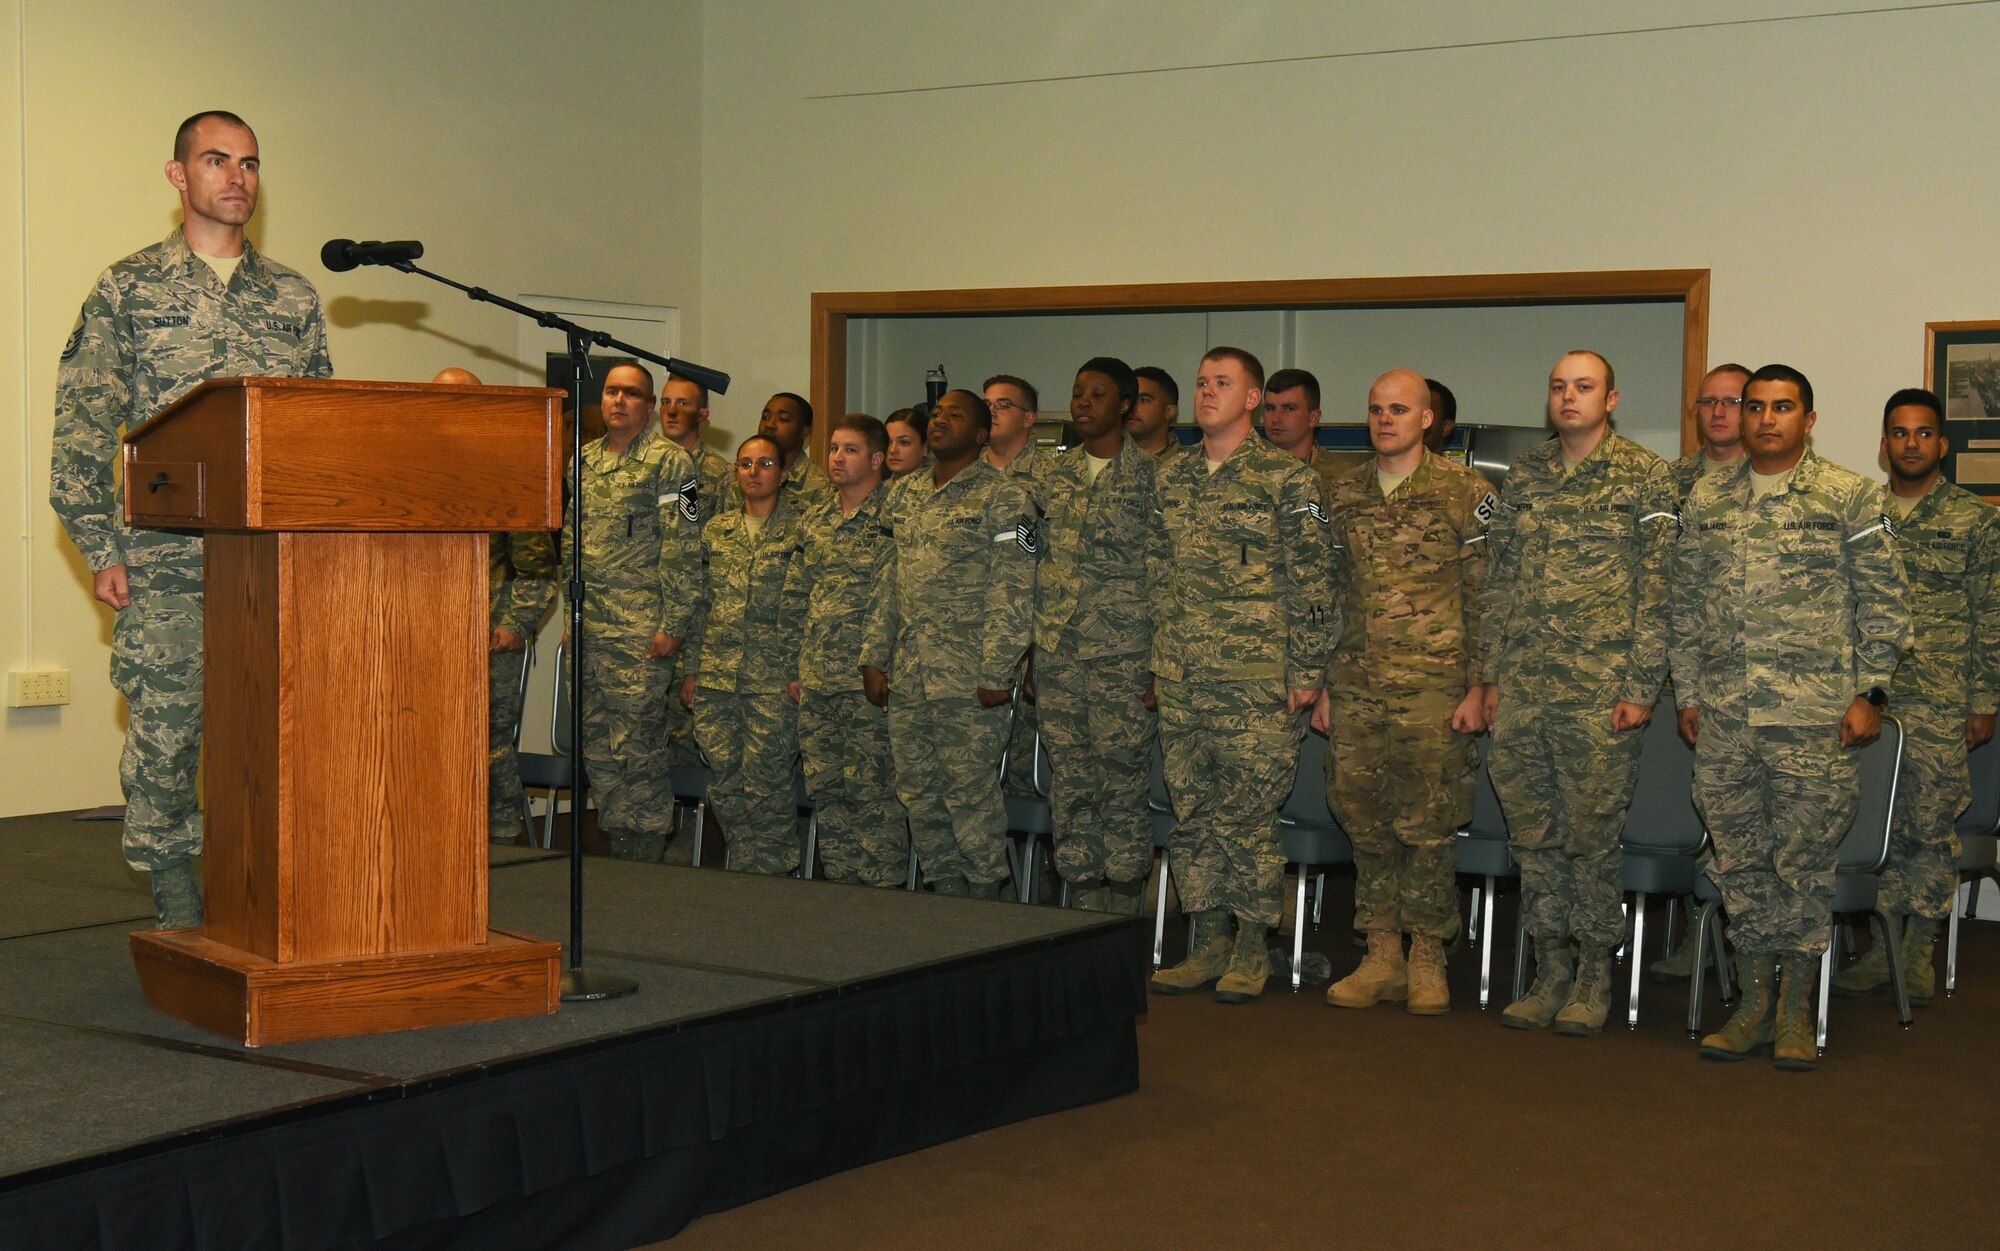 Enlisted Airmen who promoted in August, stand for the national anthem, Aug. 31, 2016, at F.E. Warren Air Force Base, Wyo. Each month the Mighty Ninety hosts a celebration for enlisted promotees from the base. (U.S. Air Force photo by Airman 1st Class Breanna Carter)

